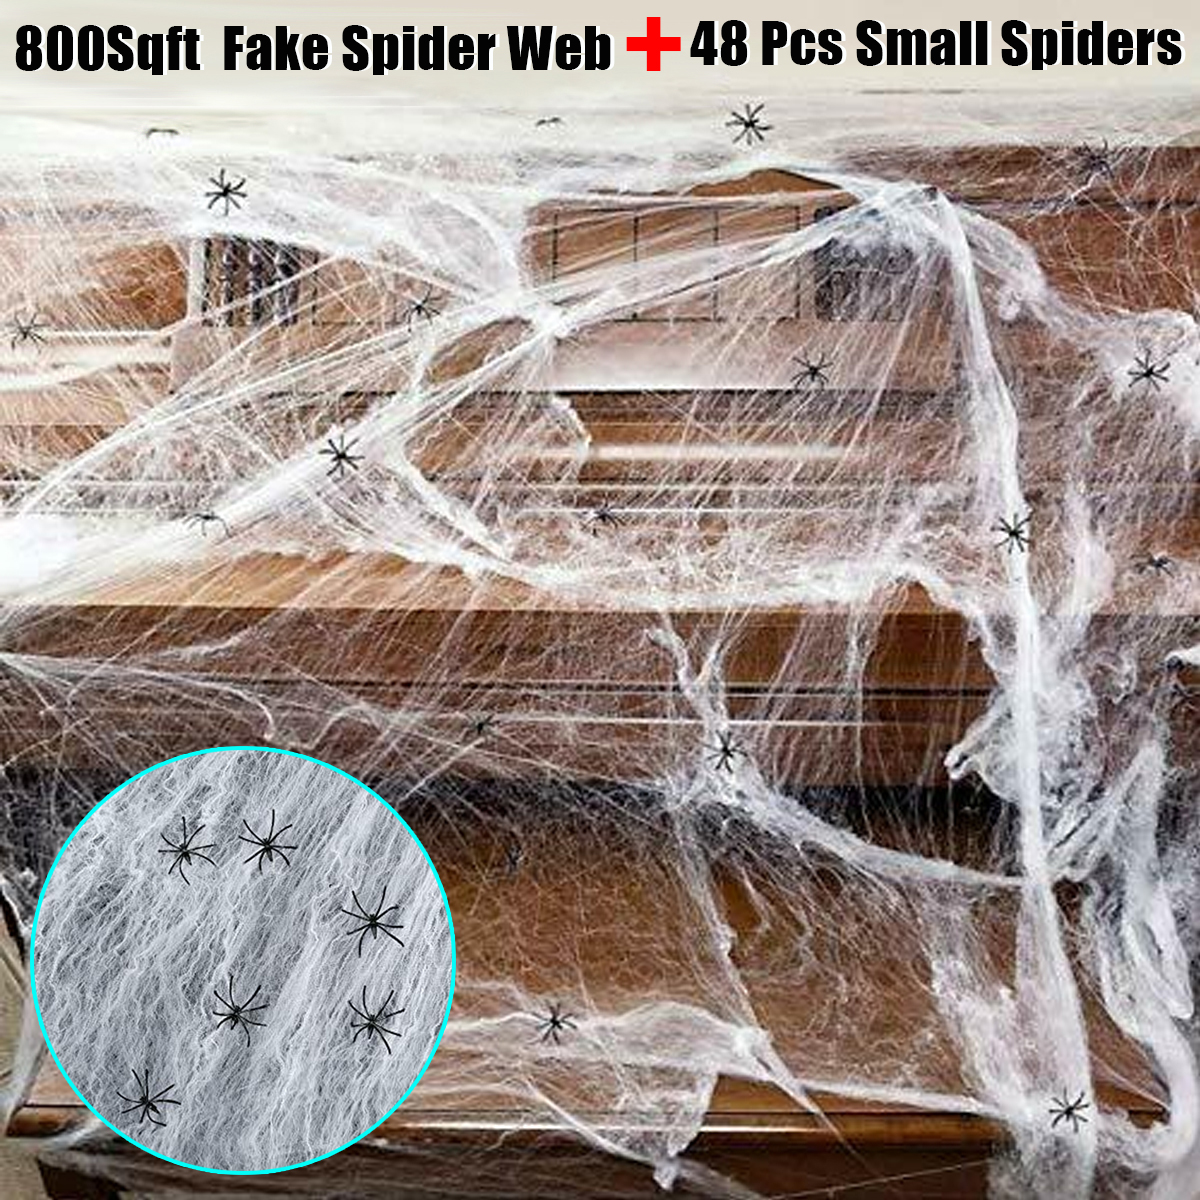 250g-Spider-Web-With-48Pcs-Small-Spiders-Halloween-Outdoor-Party-Decorations-Props-Supplies-1730880-1